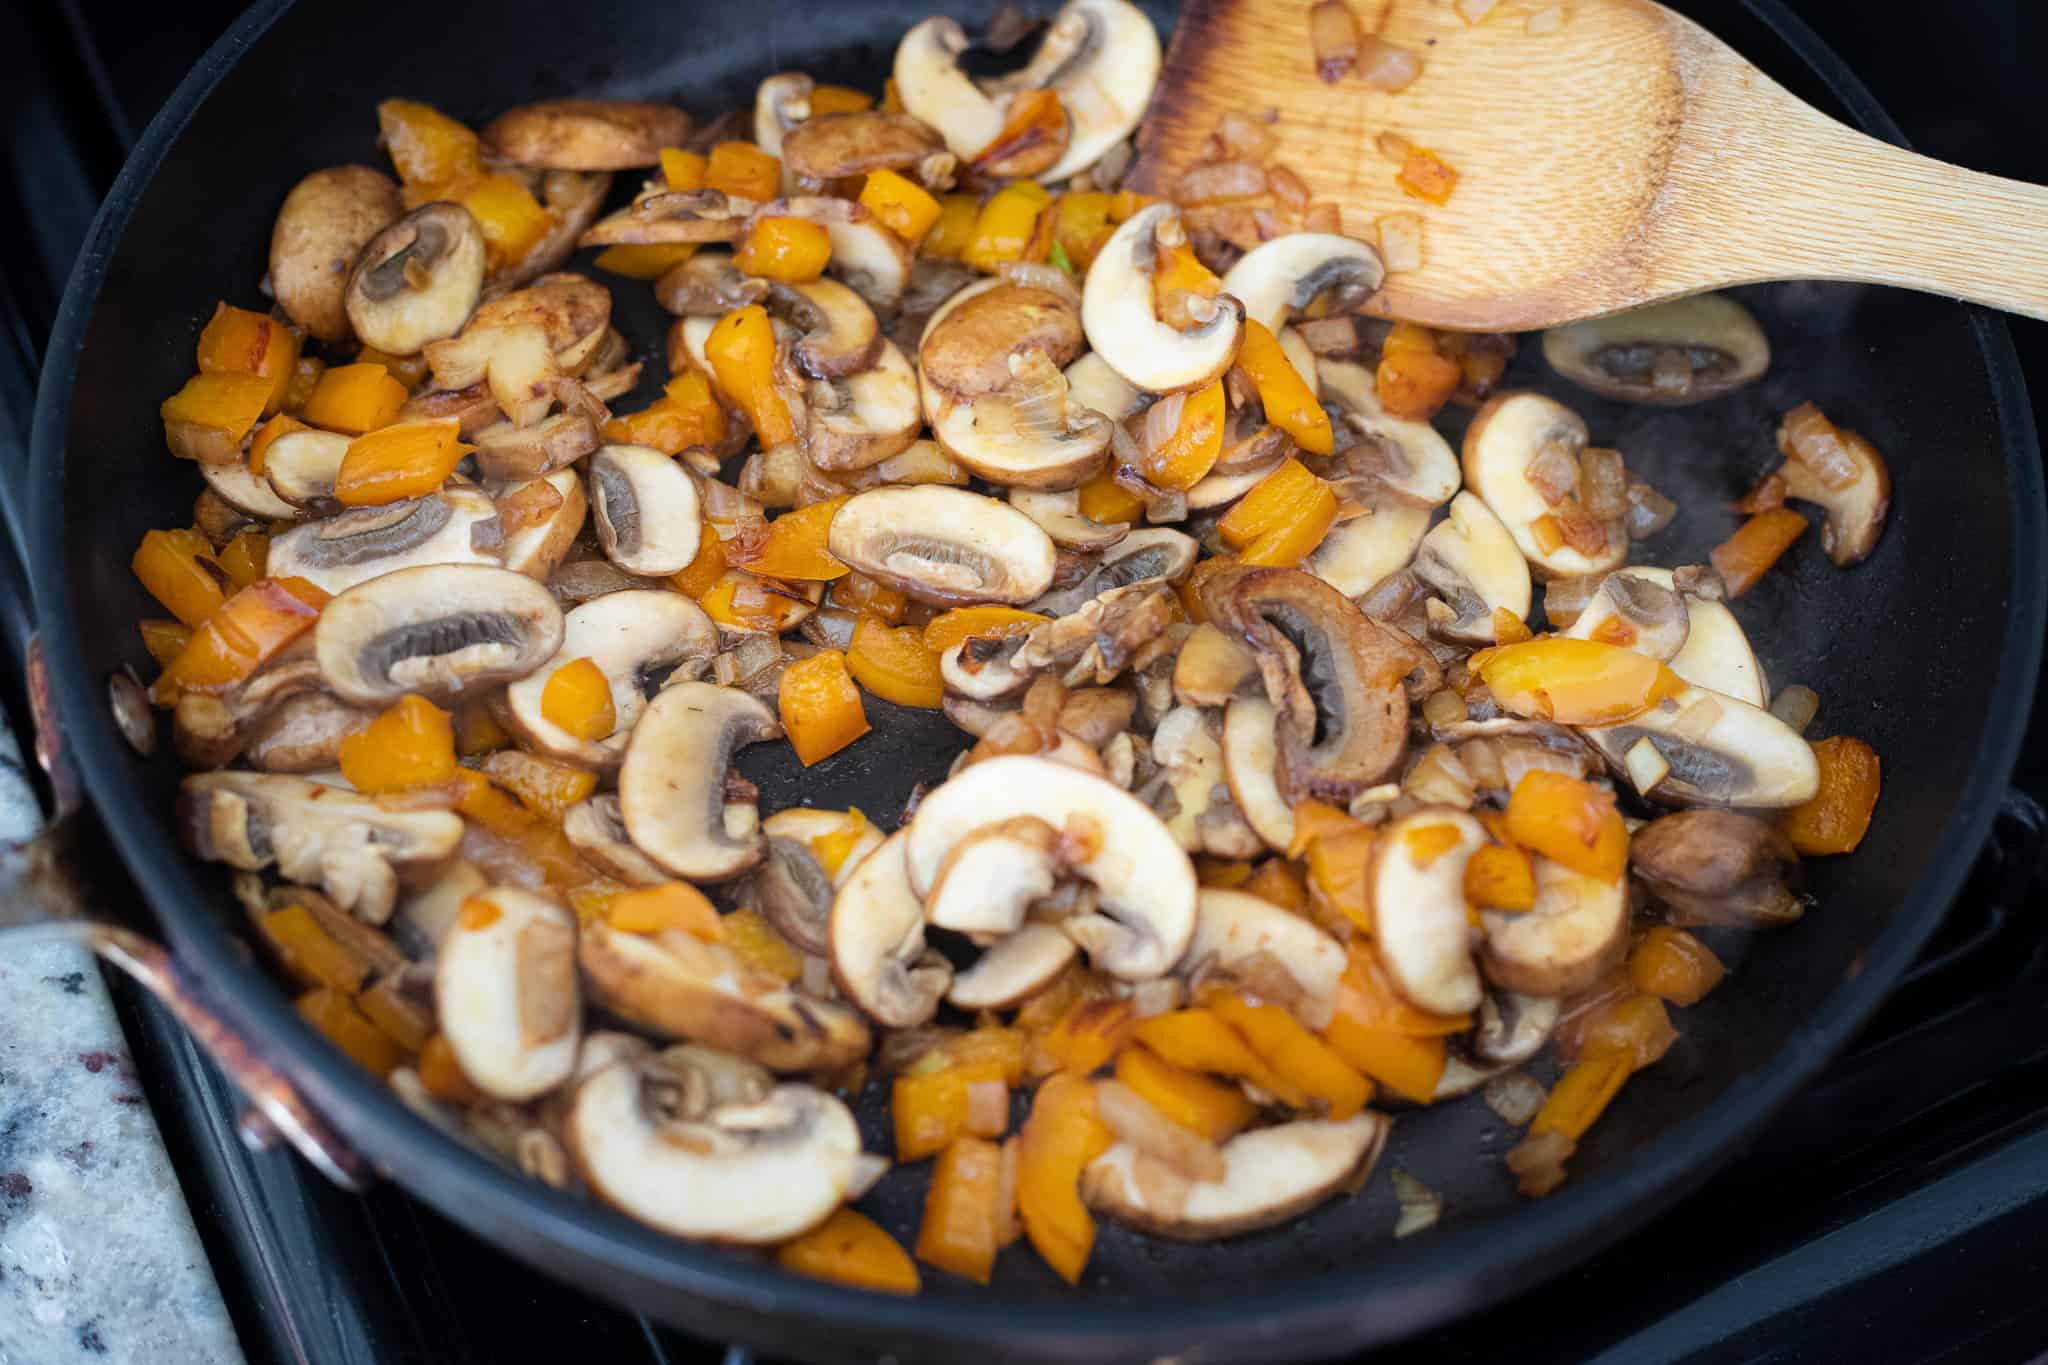 Peppers and mushrooms cooking in a pan.